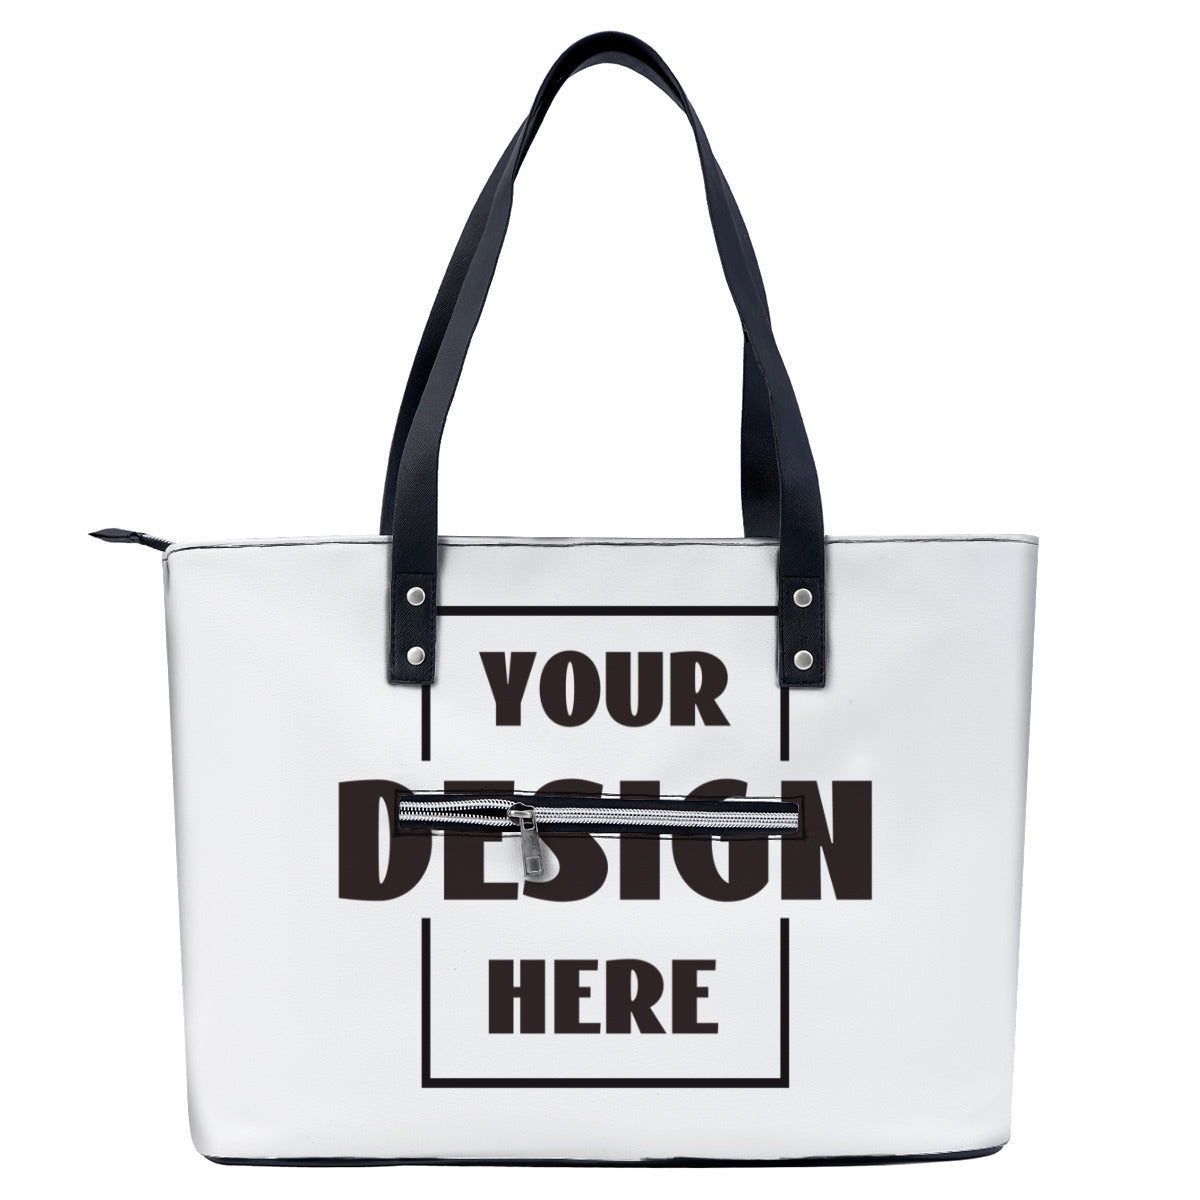 This tote bag can also have a zip added to the outside.